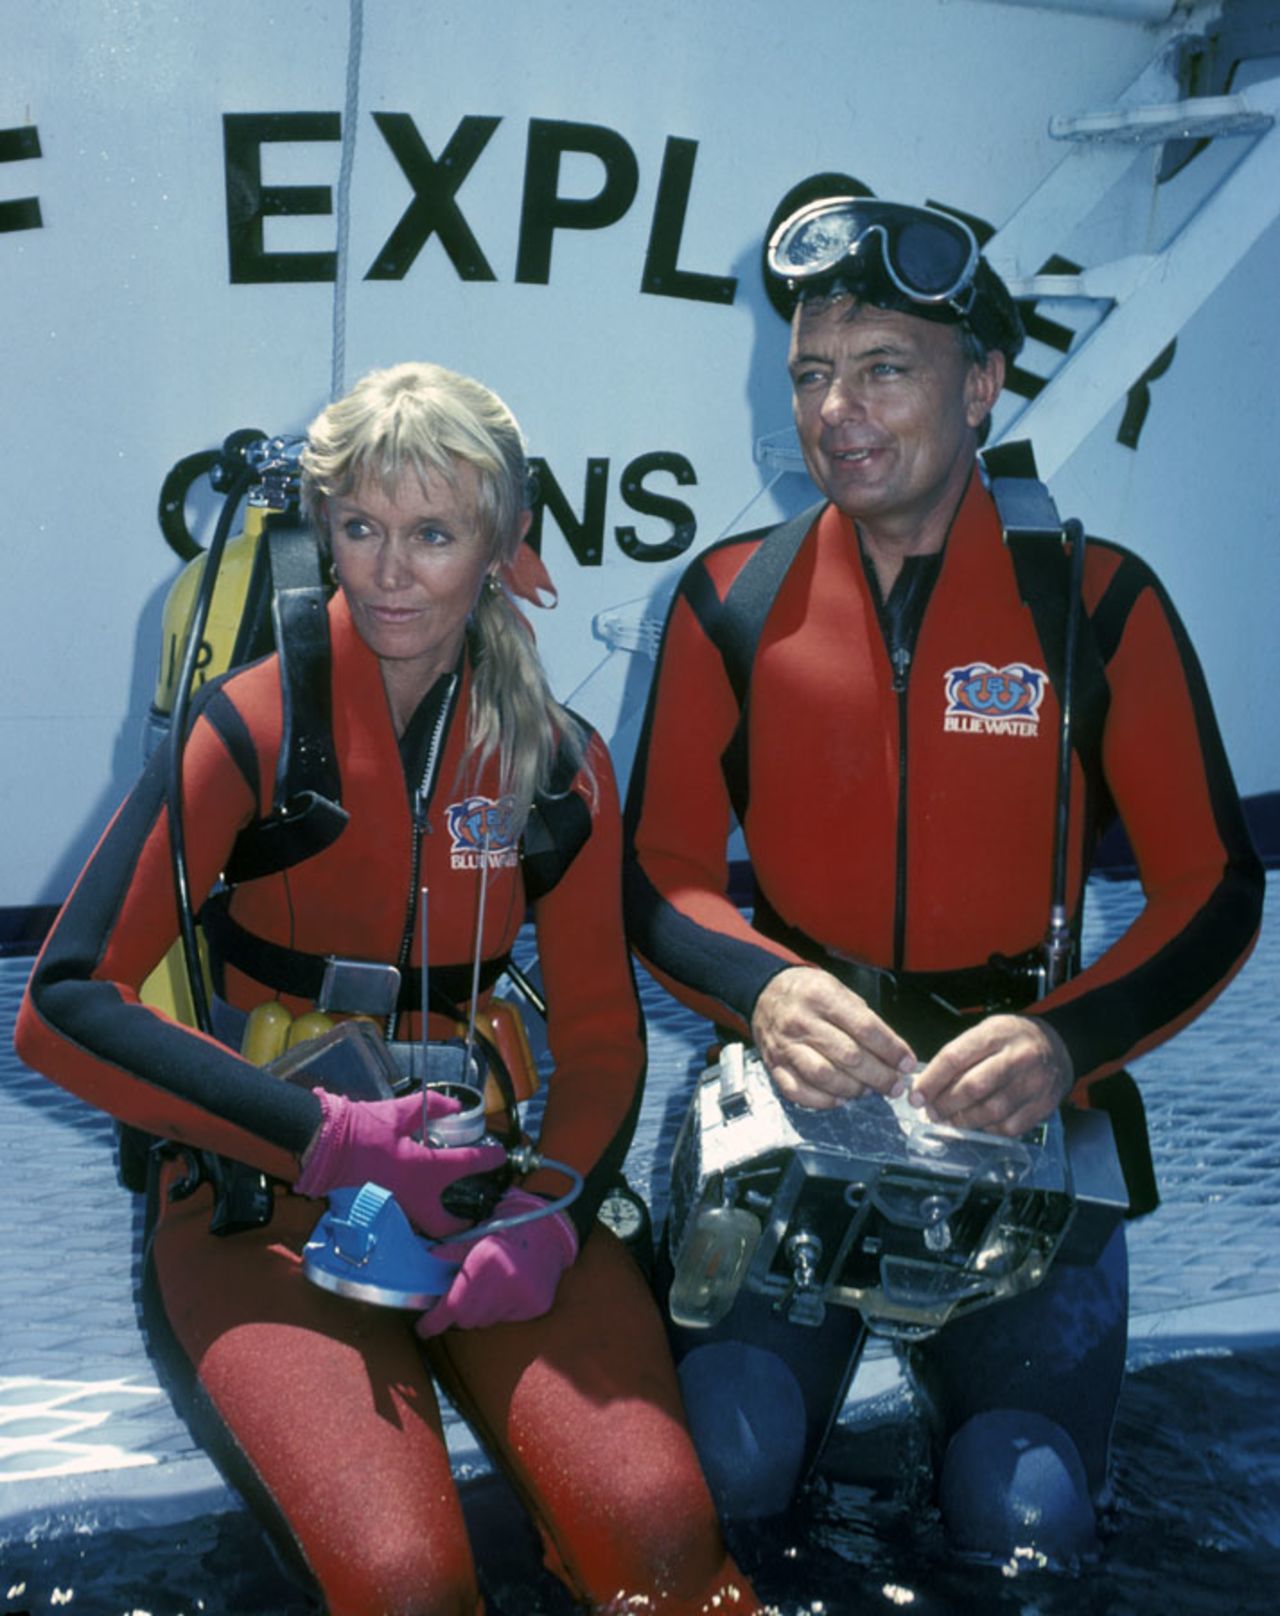 In the 1960s, Australians Valerie and Ron Taylor were competitive spear fishers. They moved into underwater photography and film making, before working to educate people about threats to the oceans and marine life.